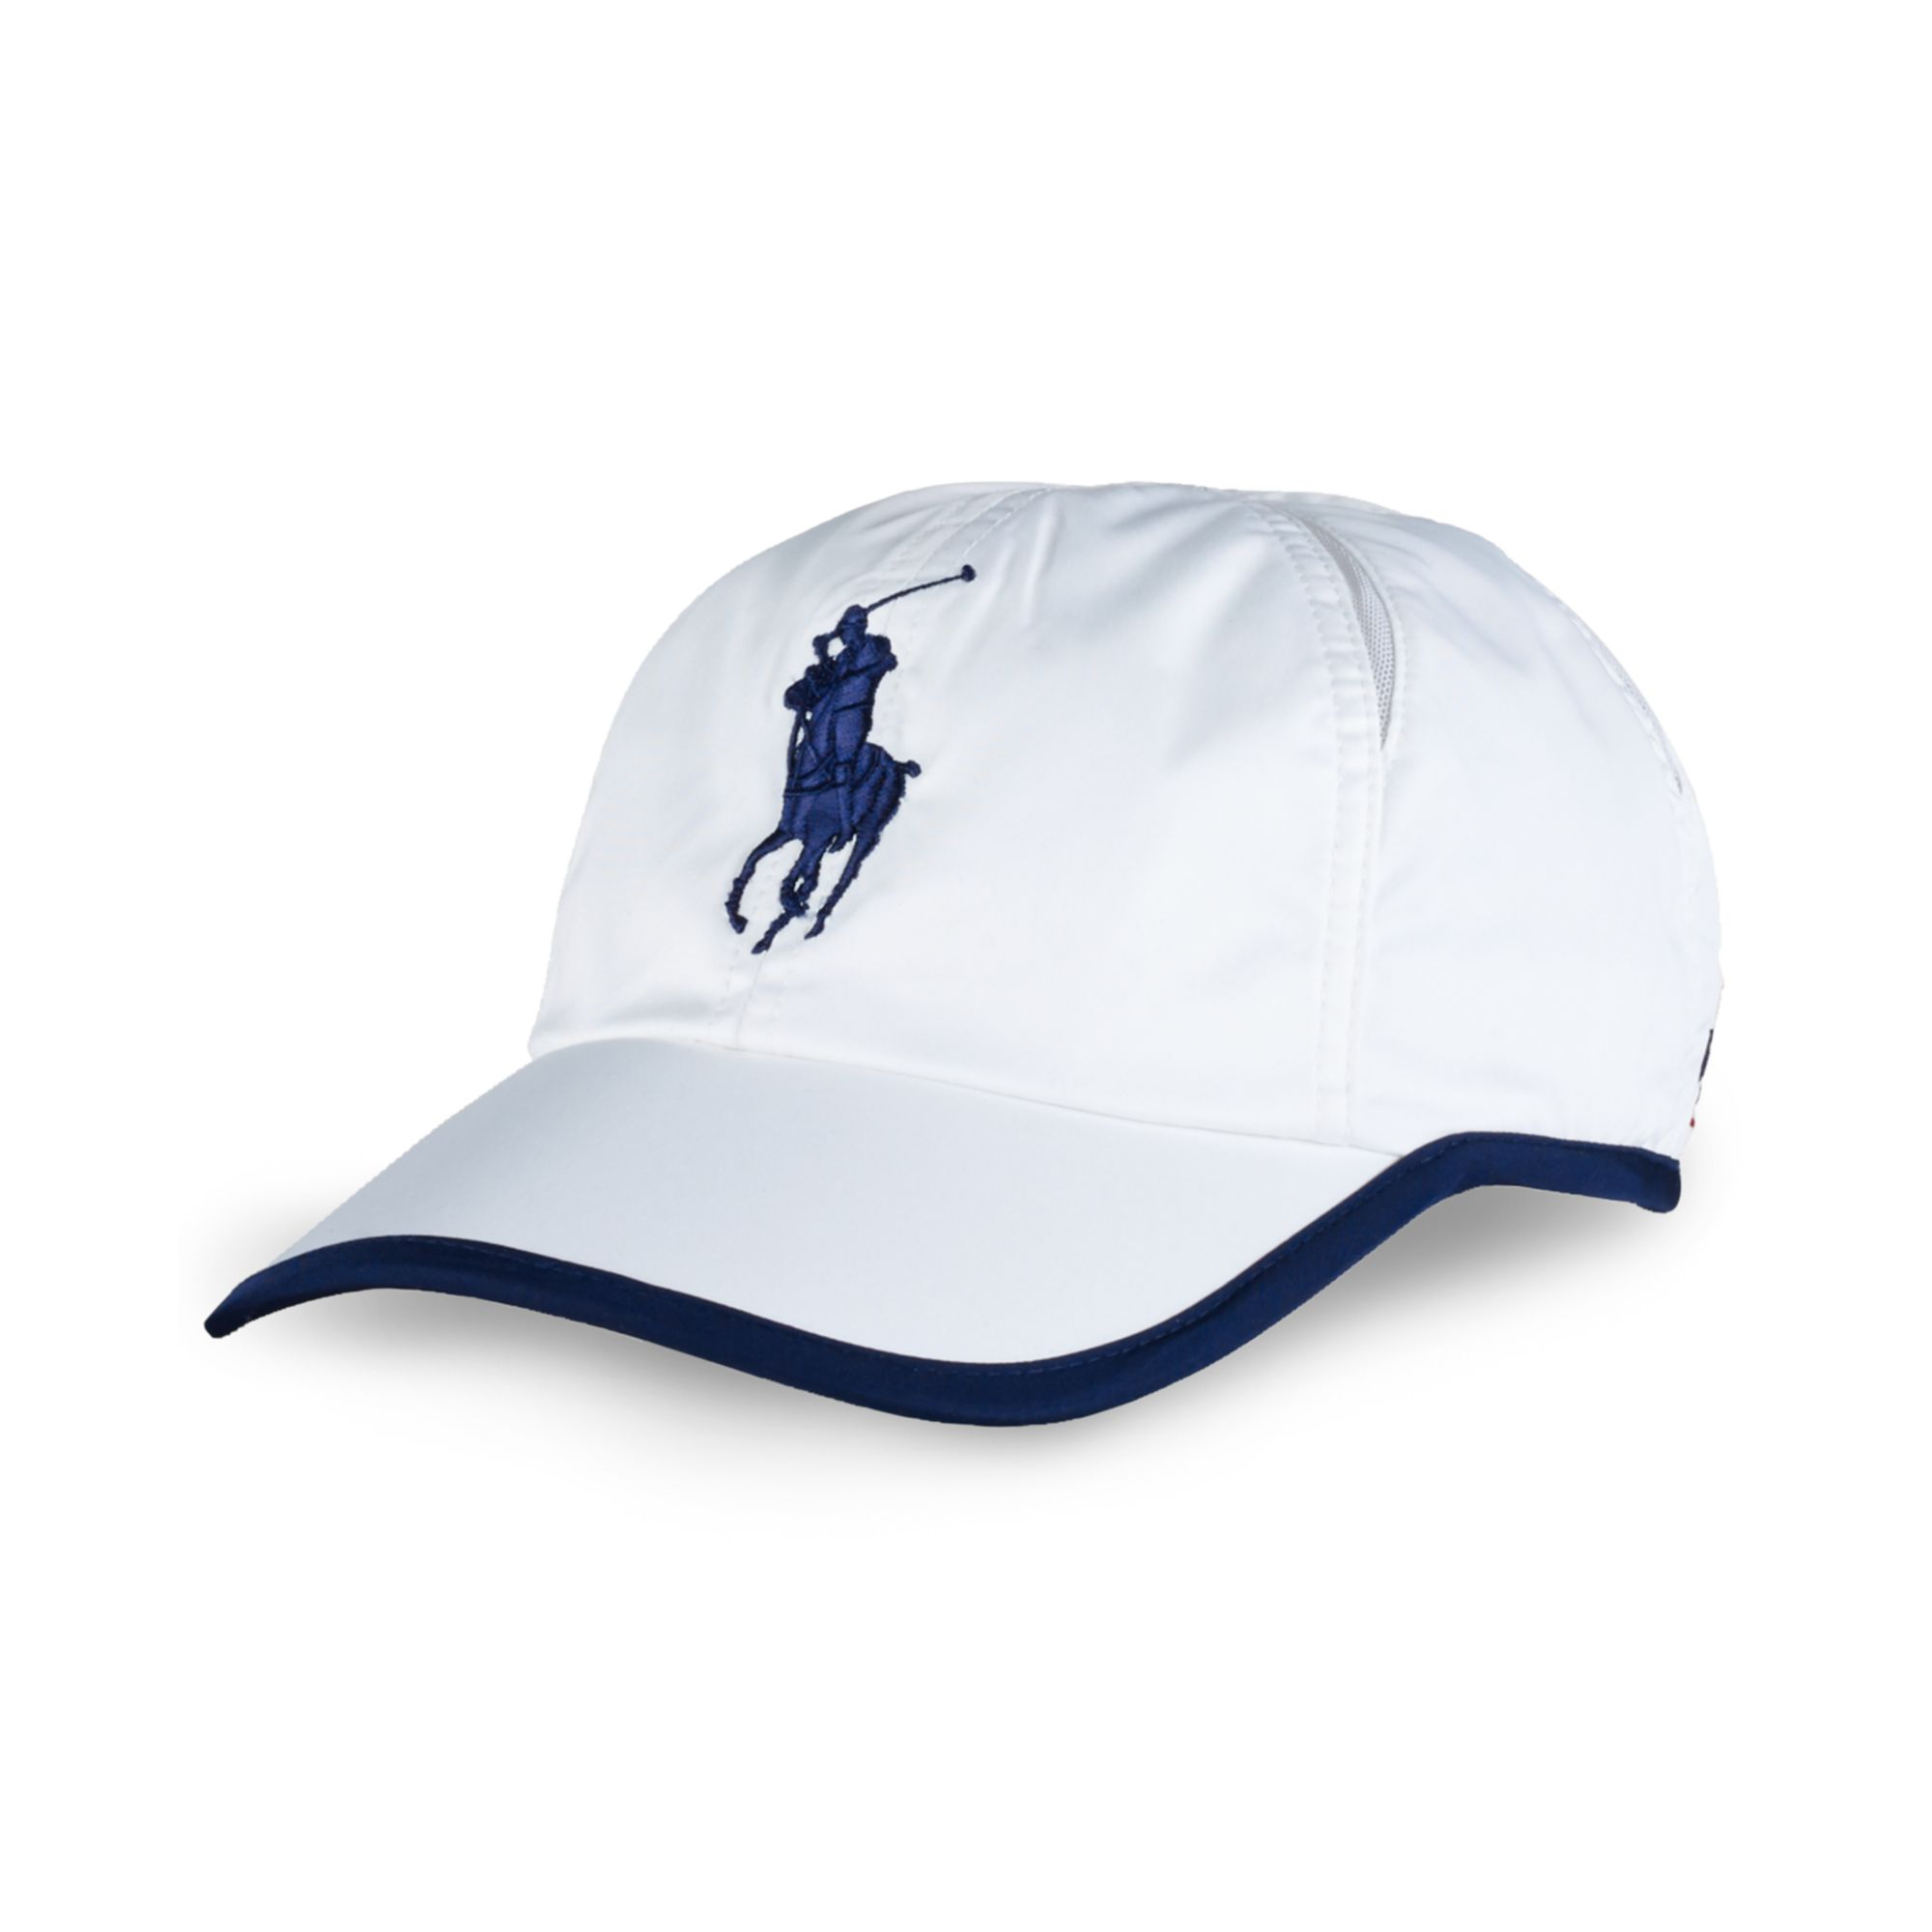 polo us open hat